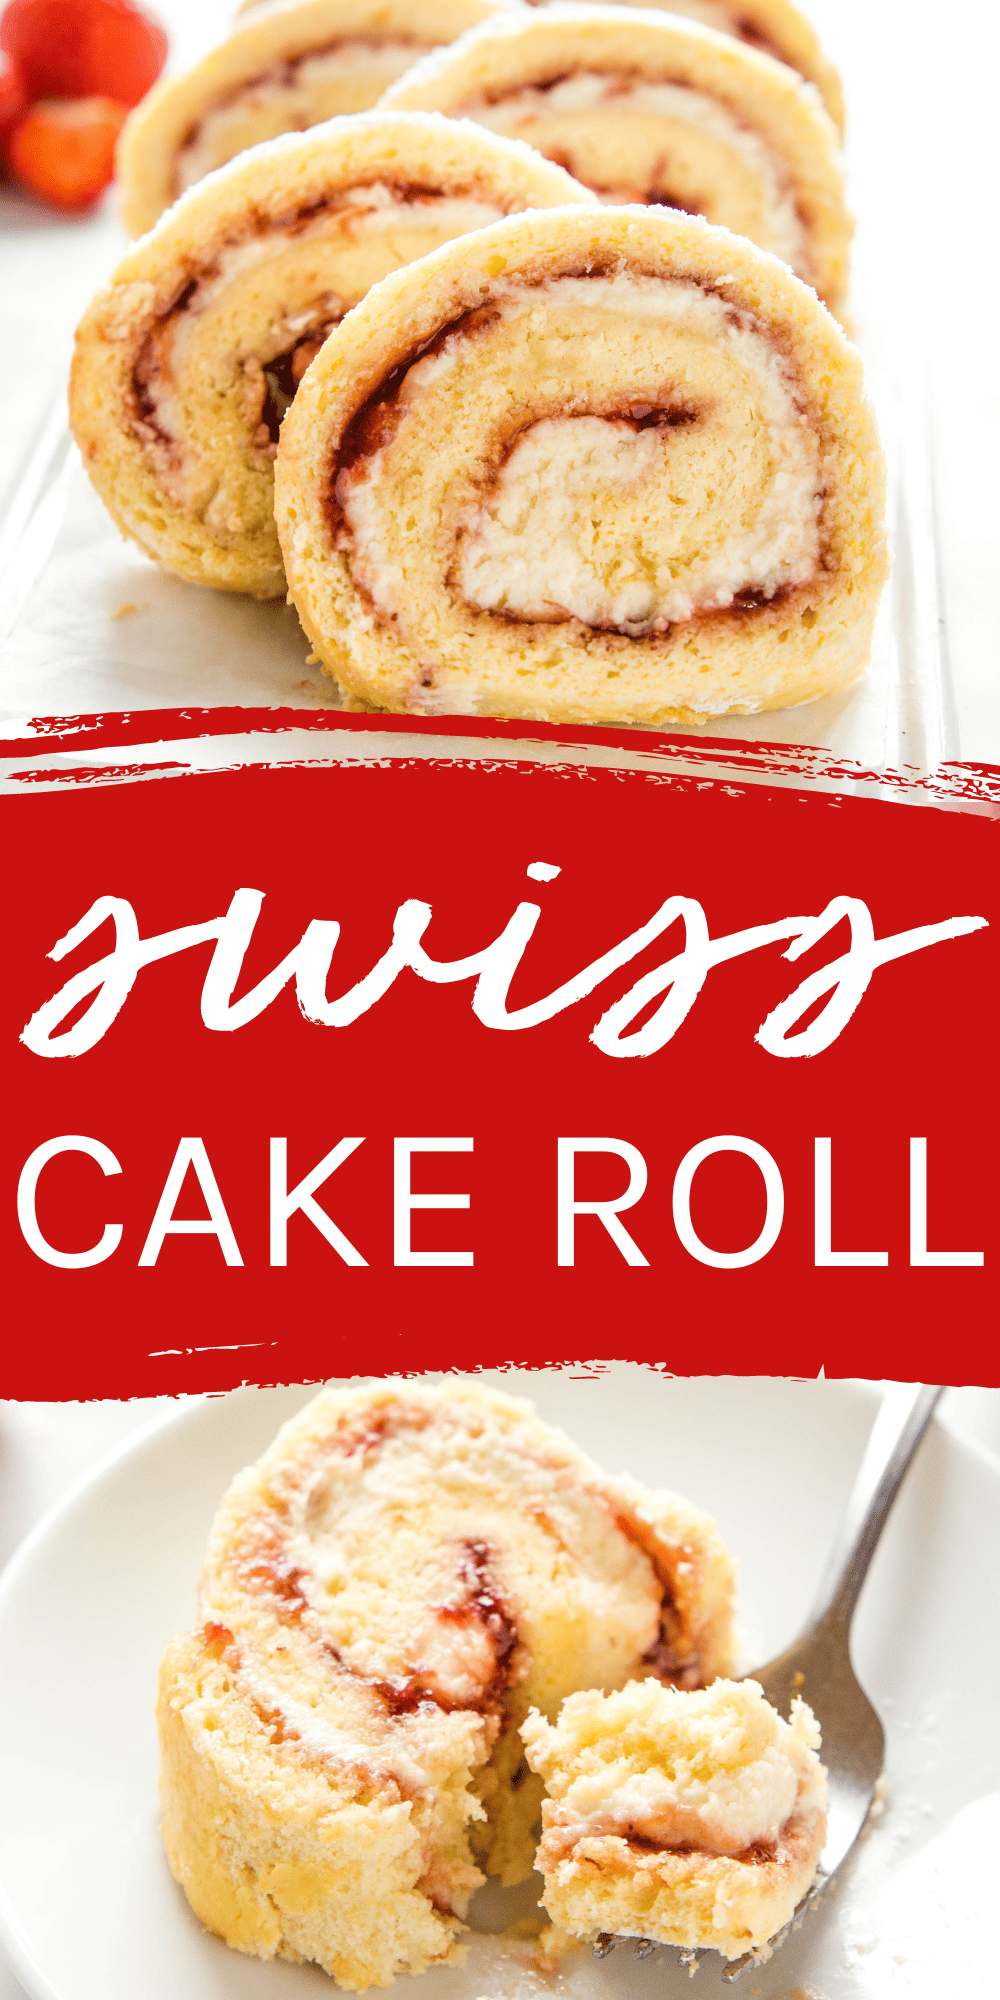 This Swiss Roll Cake recipe is the perfect spring or summer dessert - a moist and tender vanilla sponge cake with a layer of strawberry jam & filled with a light and fluffy mascarpone cream. A homemade Swiss Roll made easy with pro tips and tricks! Recipe from thebusybaker.ca! #swissroll #cakeroll #rollcake #vanillacakeroll #swissrollcake #easycakeroll #dessert #bakerystyle via @busybakerblog